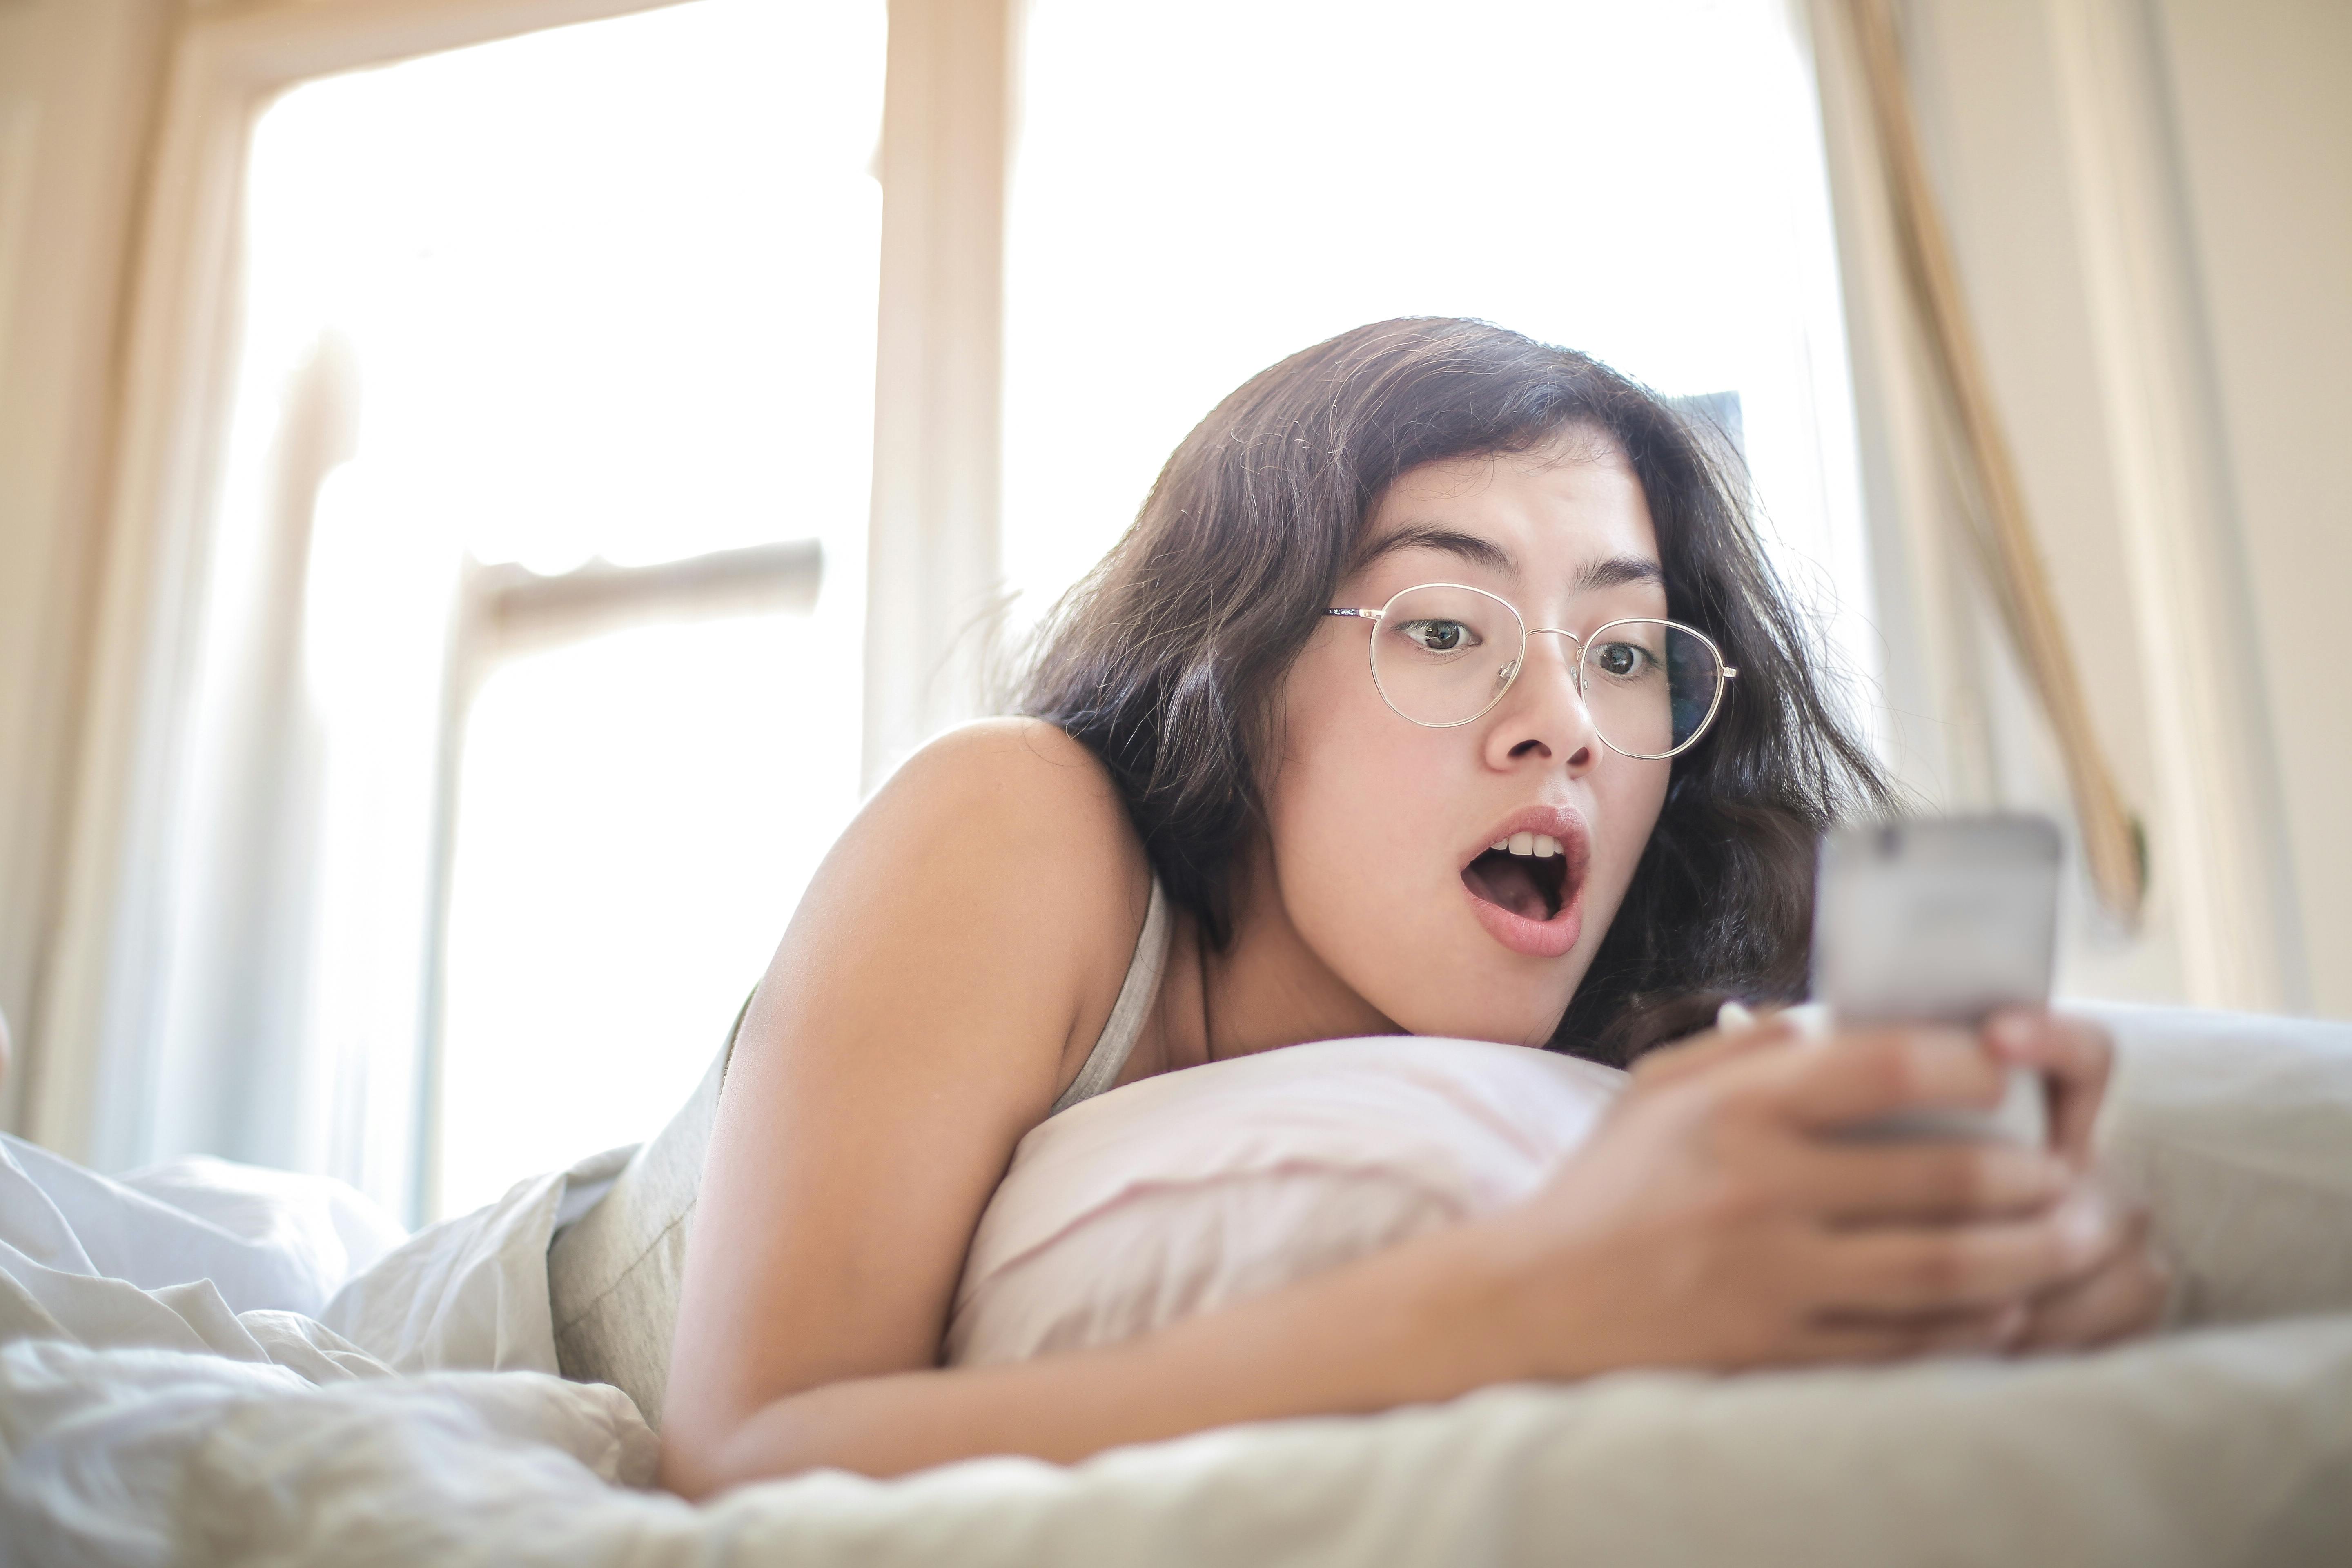 A woman lying on the bed while holding a smartphone | Source: Pexels